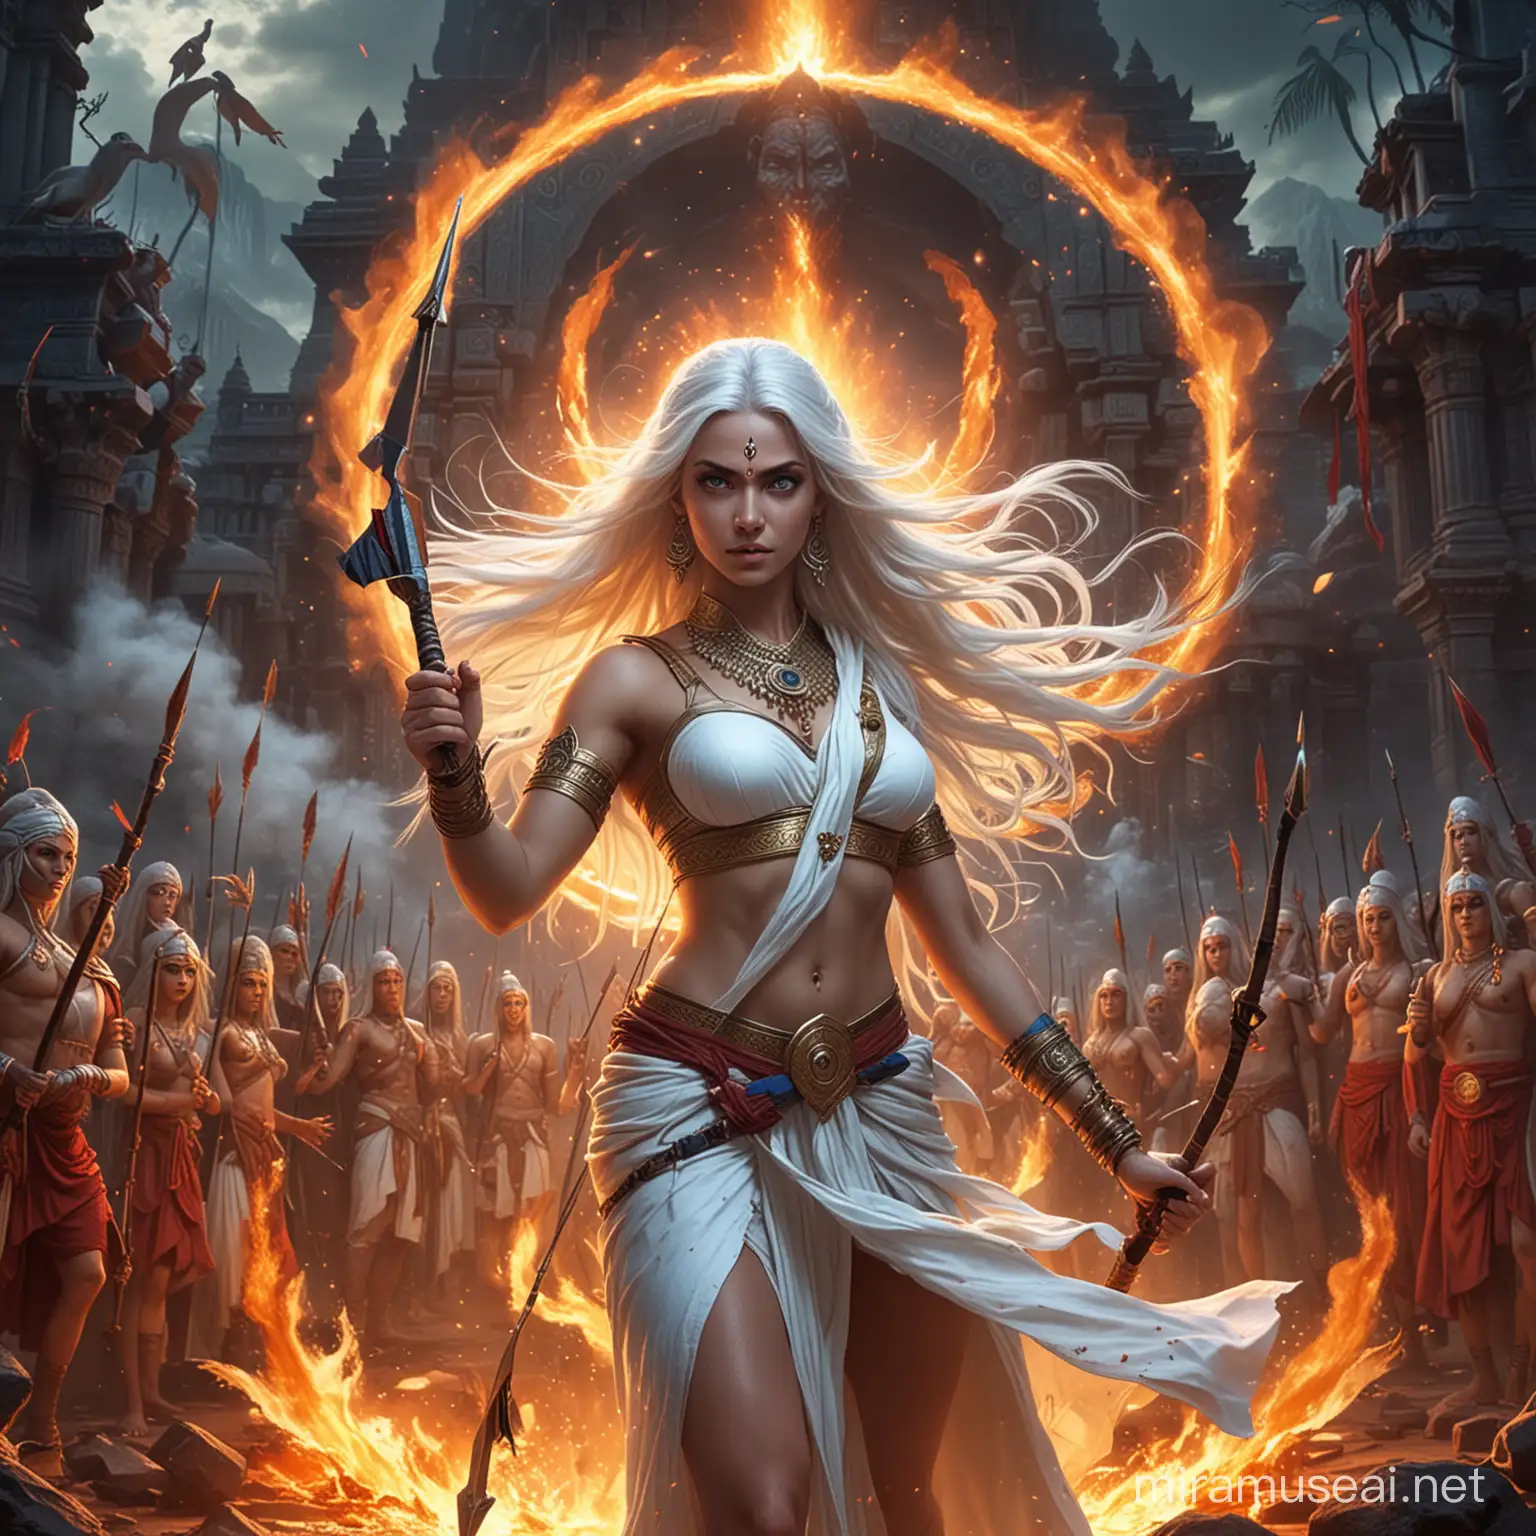 Powerful Hindu Empress Surrounded by Fire and Cosmic Energy in Battle